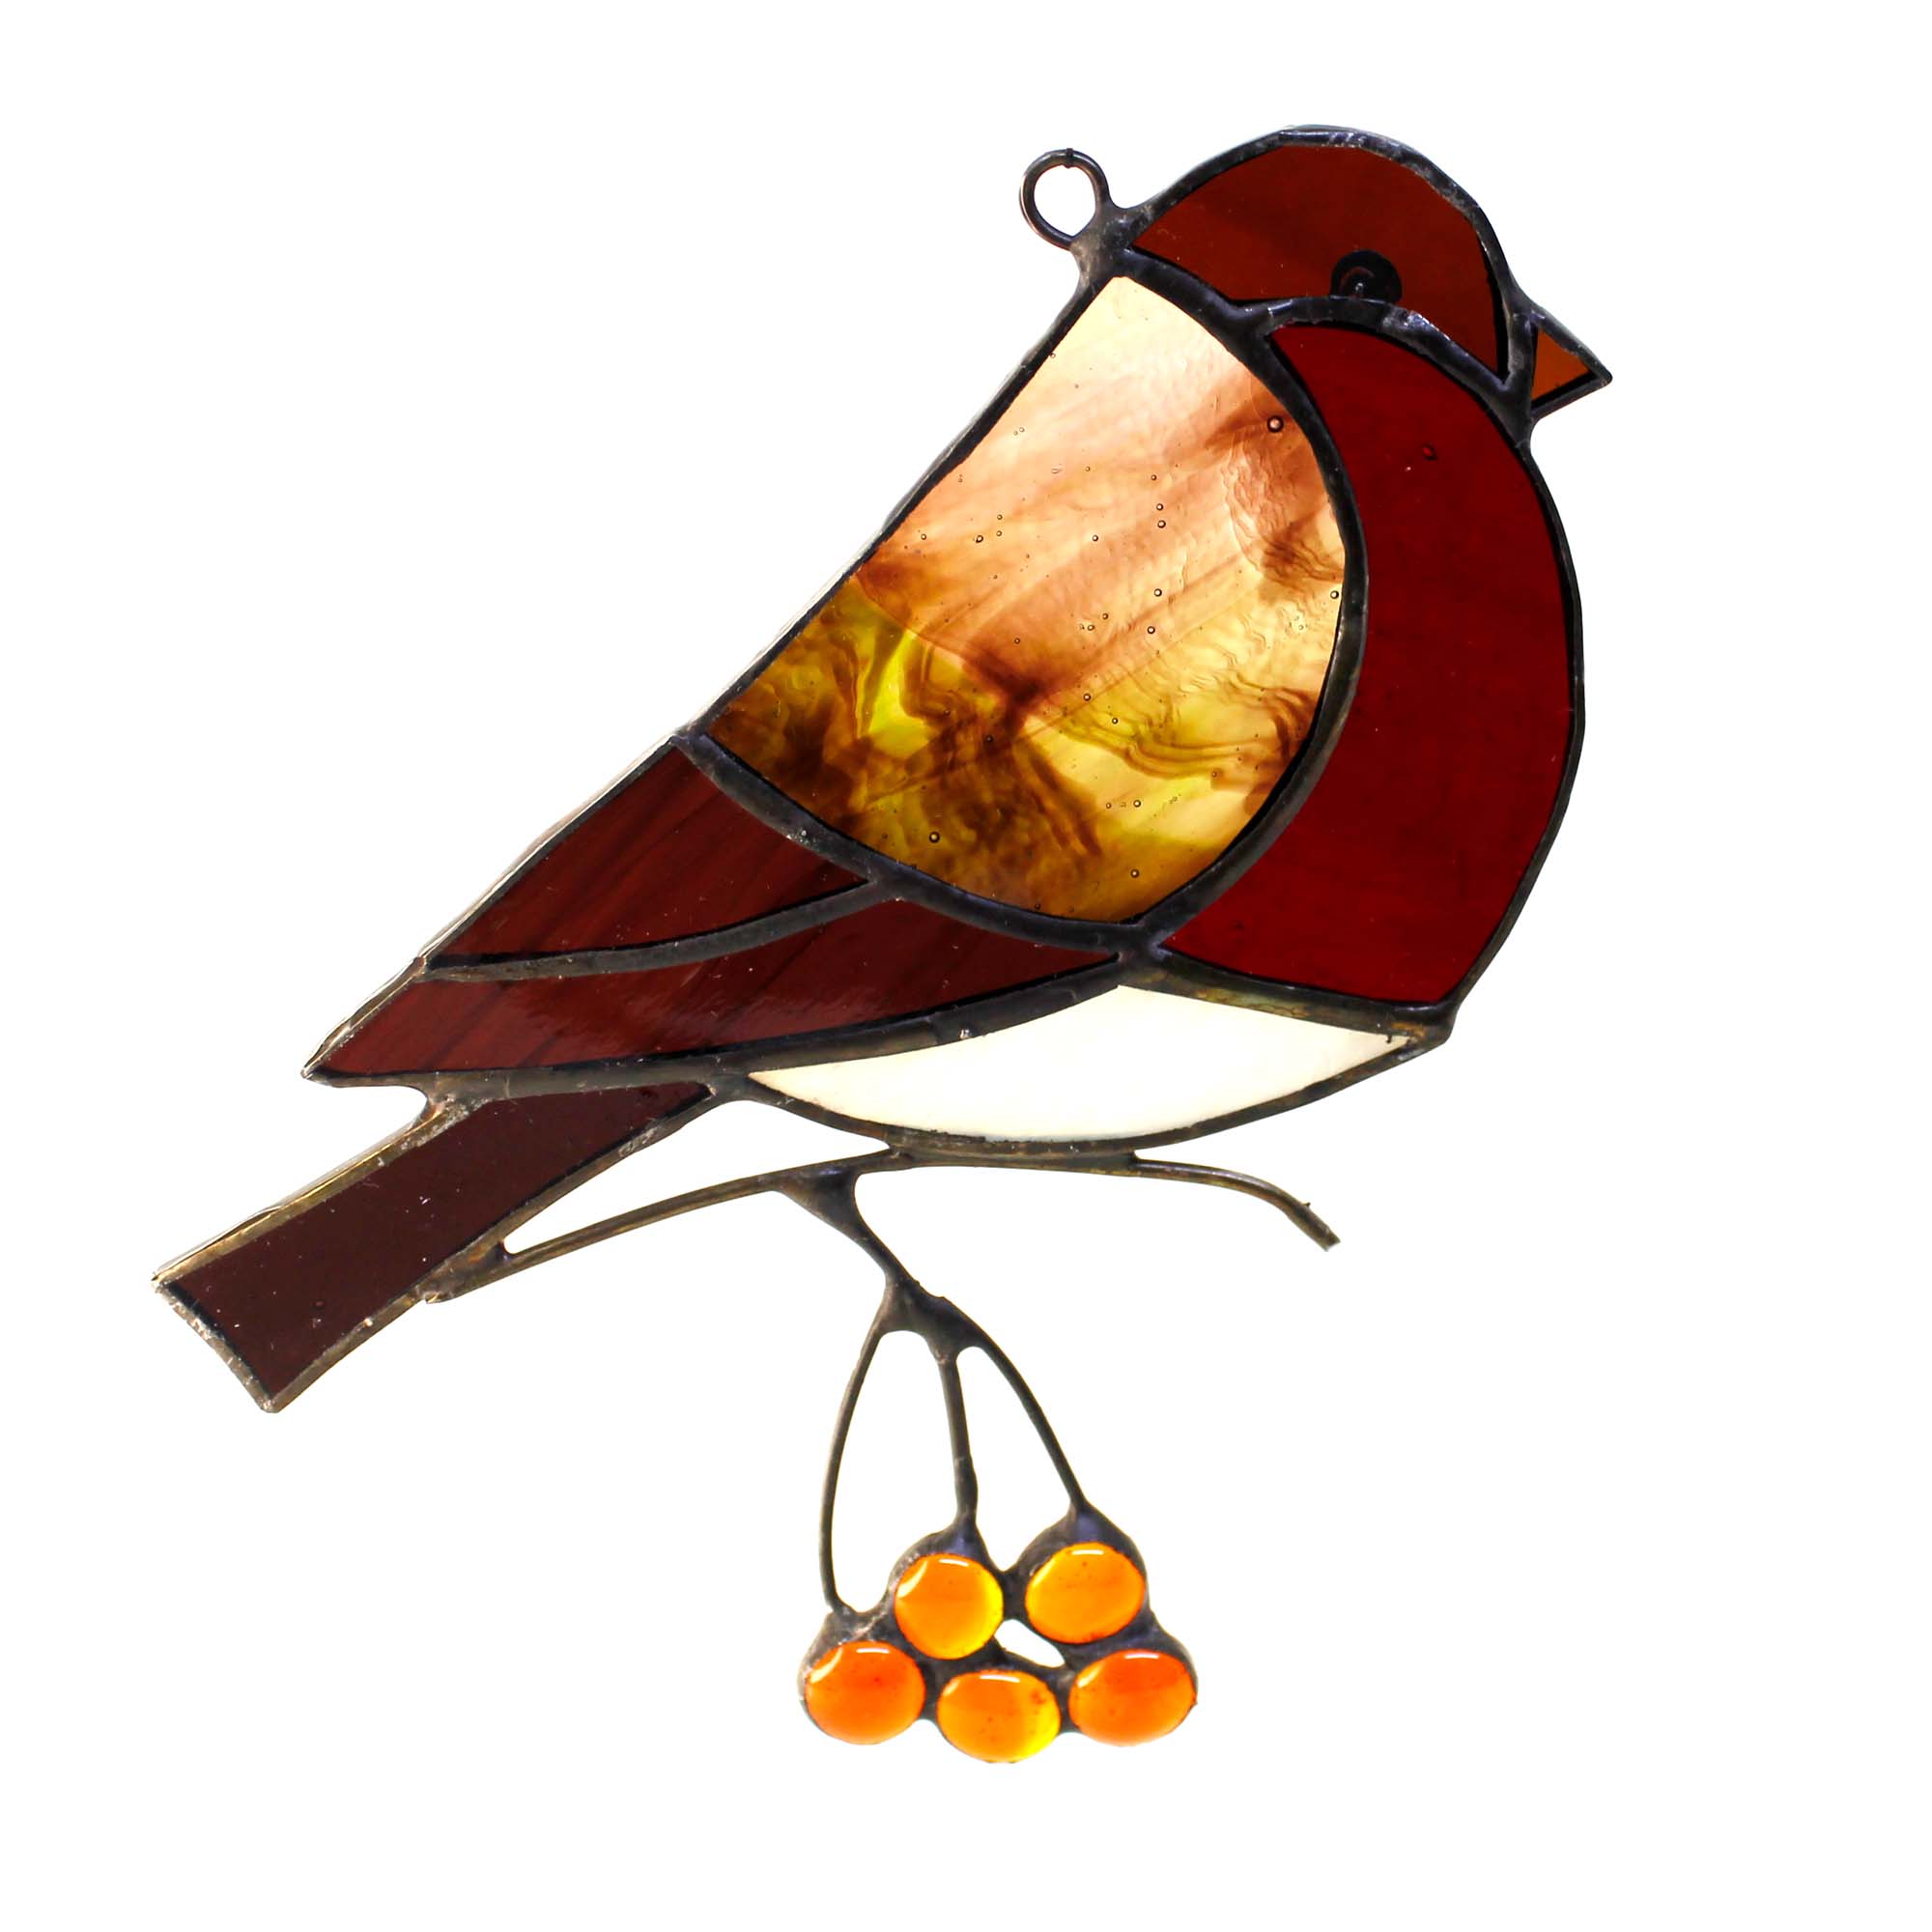 STAINED GLASS DECOR - BIRD